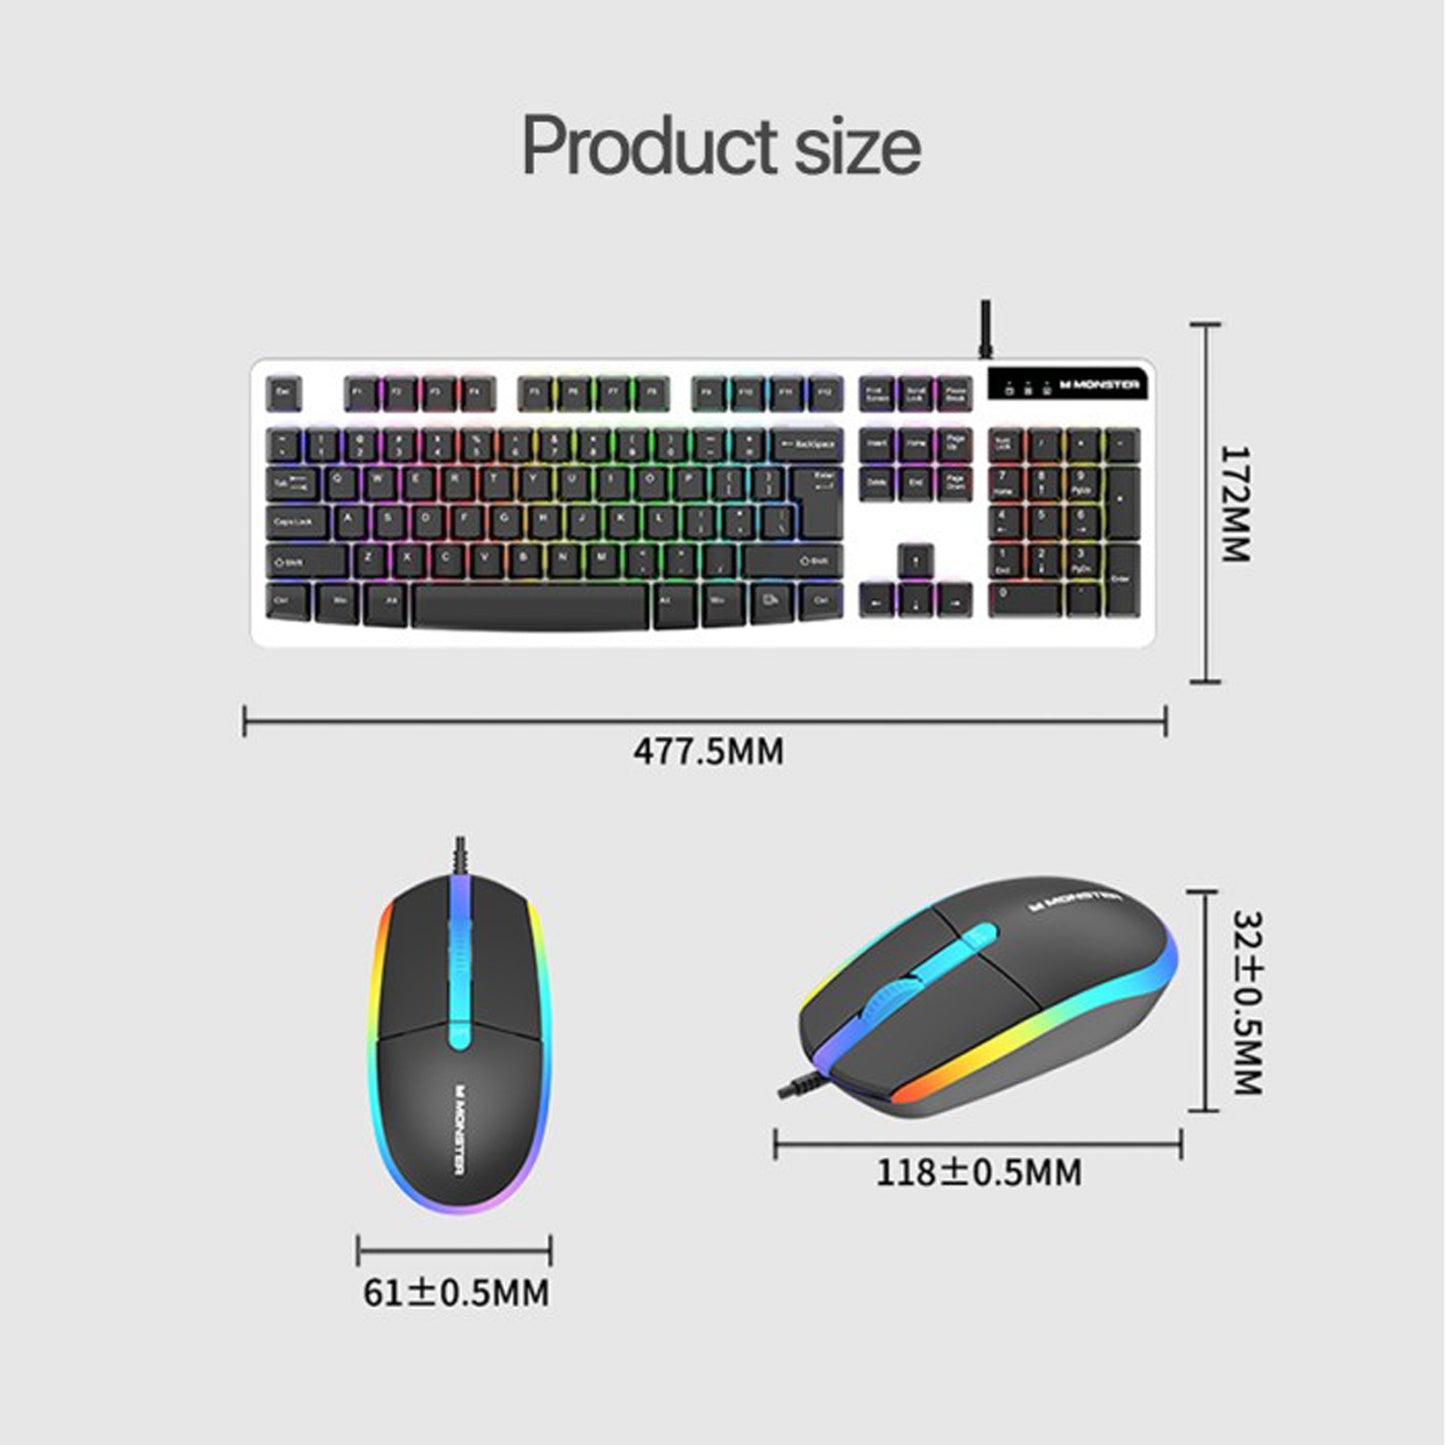 Monster Airmars KM1 Pro Keyboard and Mouse Combo